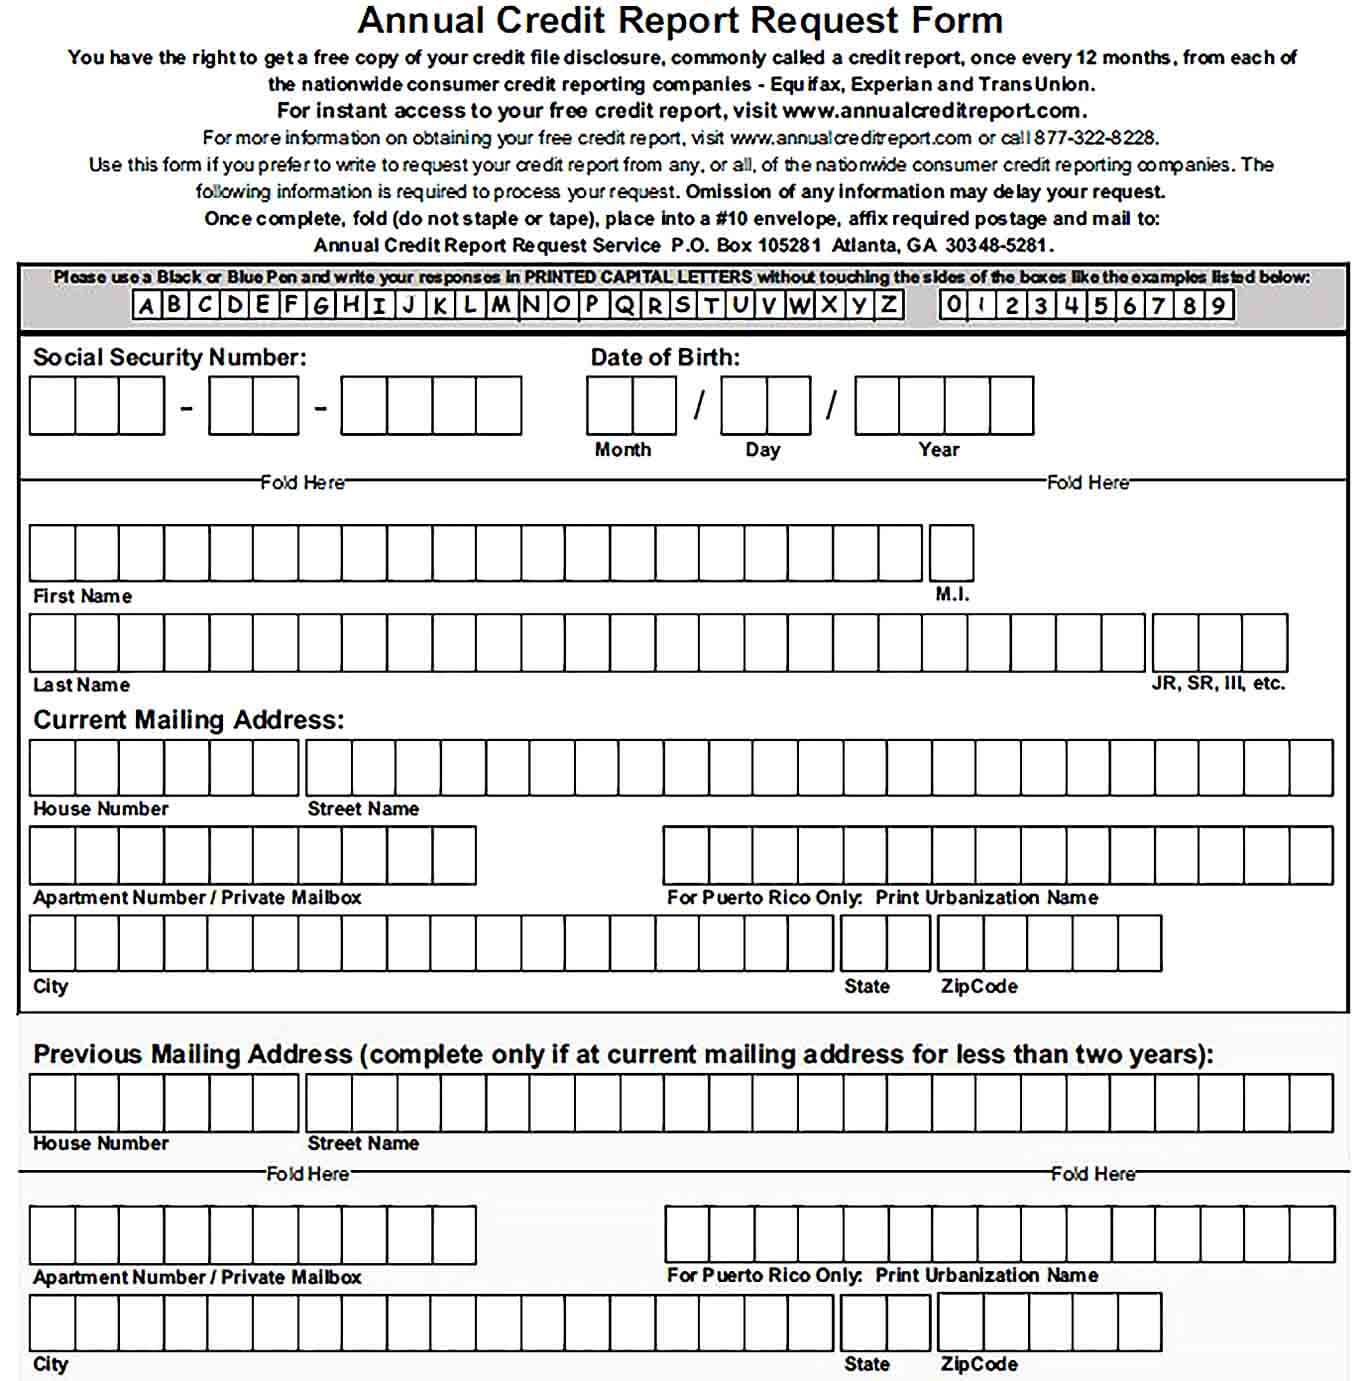 Sample Best Annual Credit Report Request Form